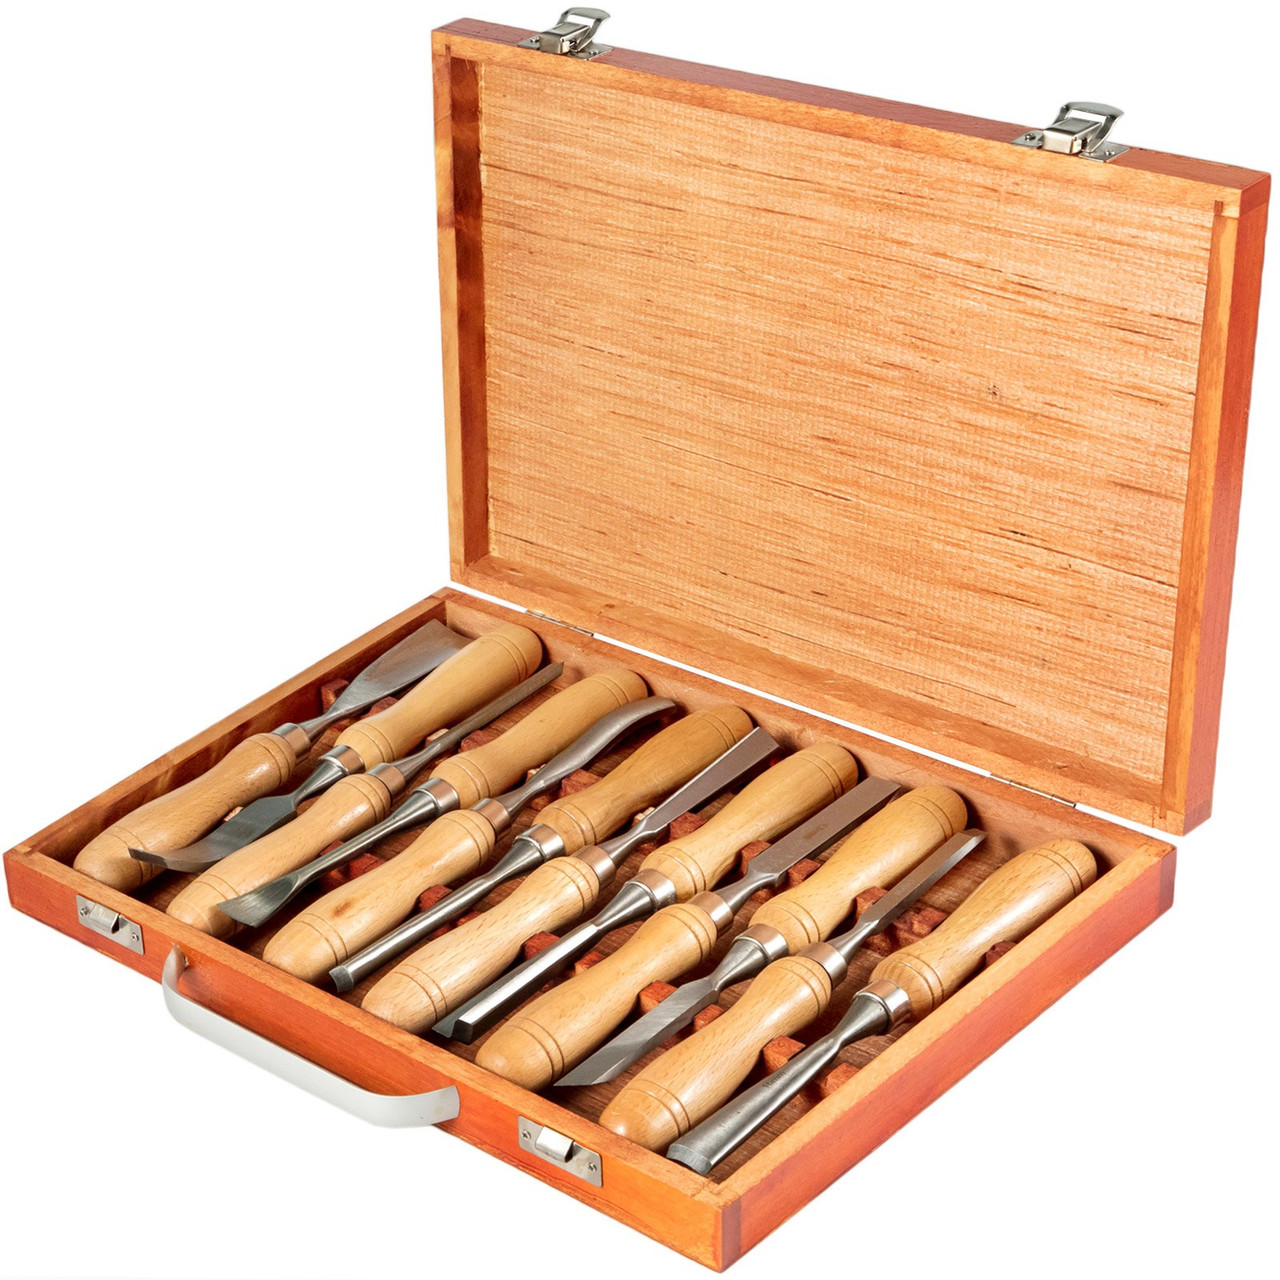 Wood Chisel Sets Lathe Chisels 8pcs For Wood Root Furniture Carving Lathes  Red